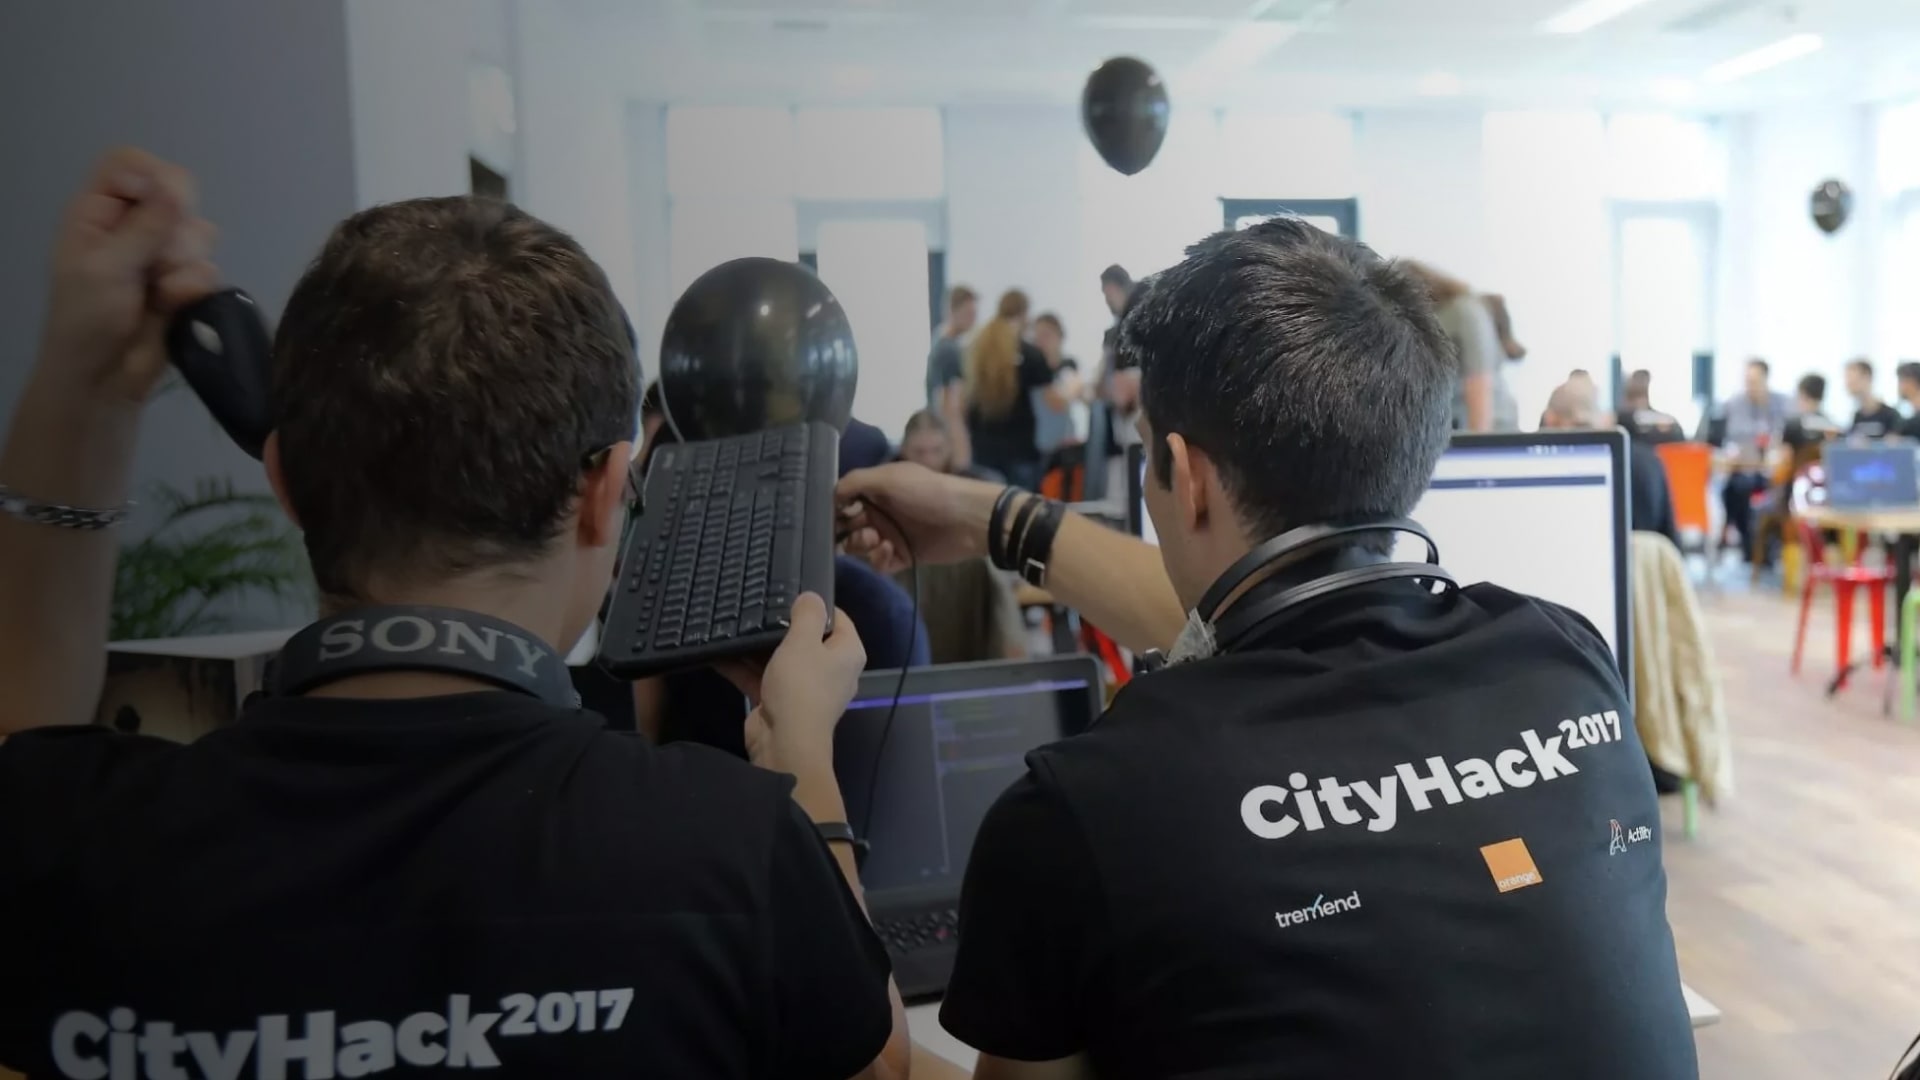 CityHack 2017 – the competition for a smarter city